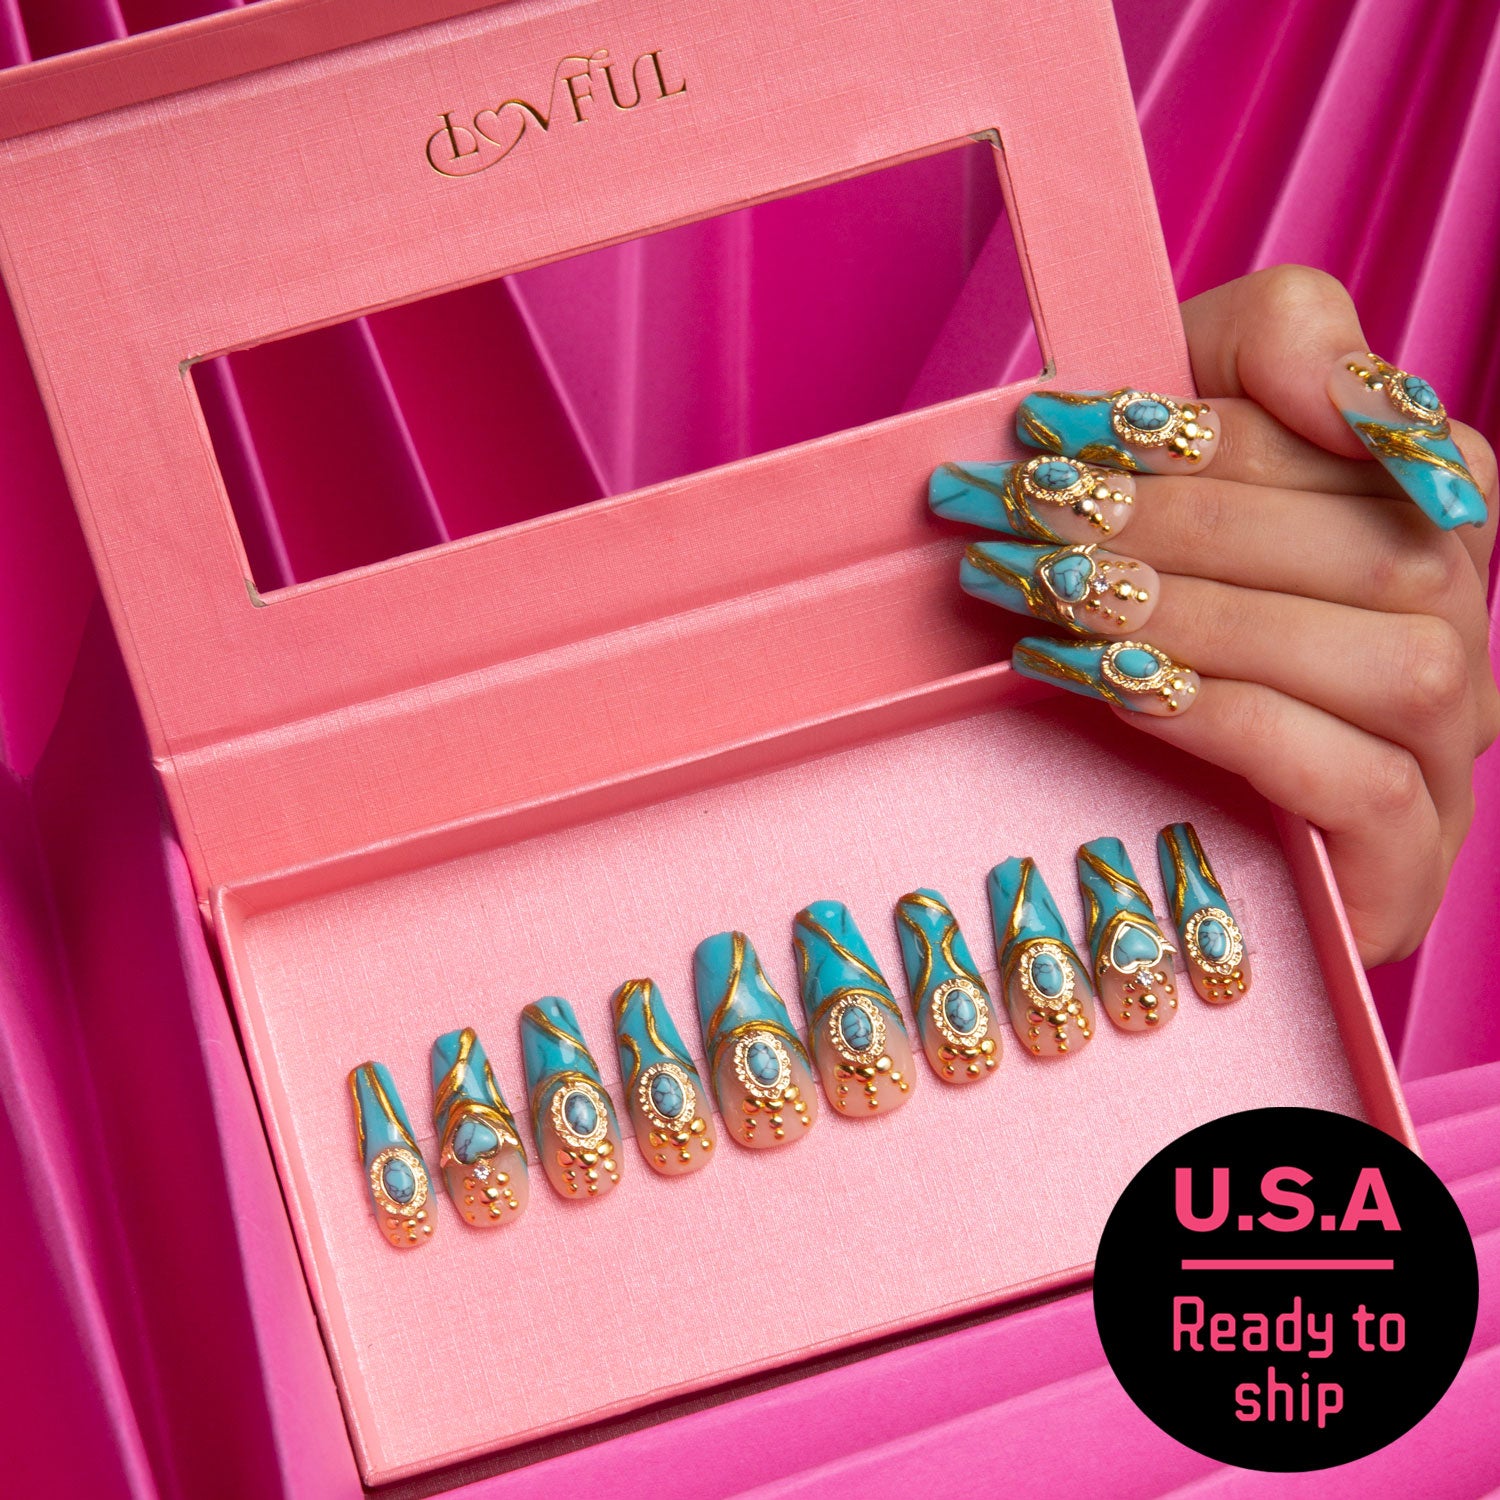 Box of luxurious press-on acrylic nails with turquoise and gold decor, held by a hand with matching nails. Lovful branding and 'USA Ready to ship' badge. Pink background.